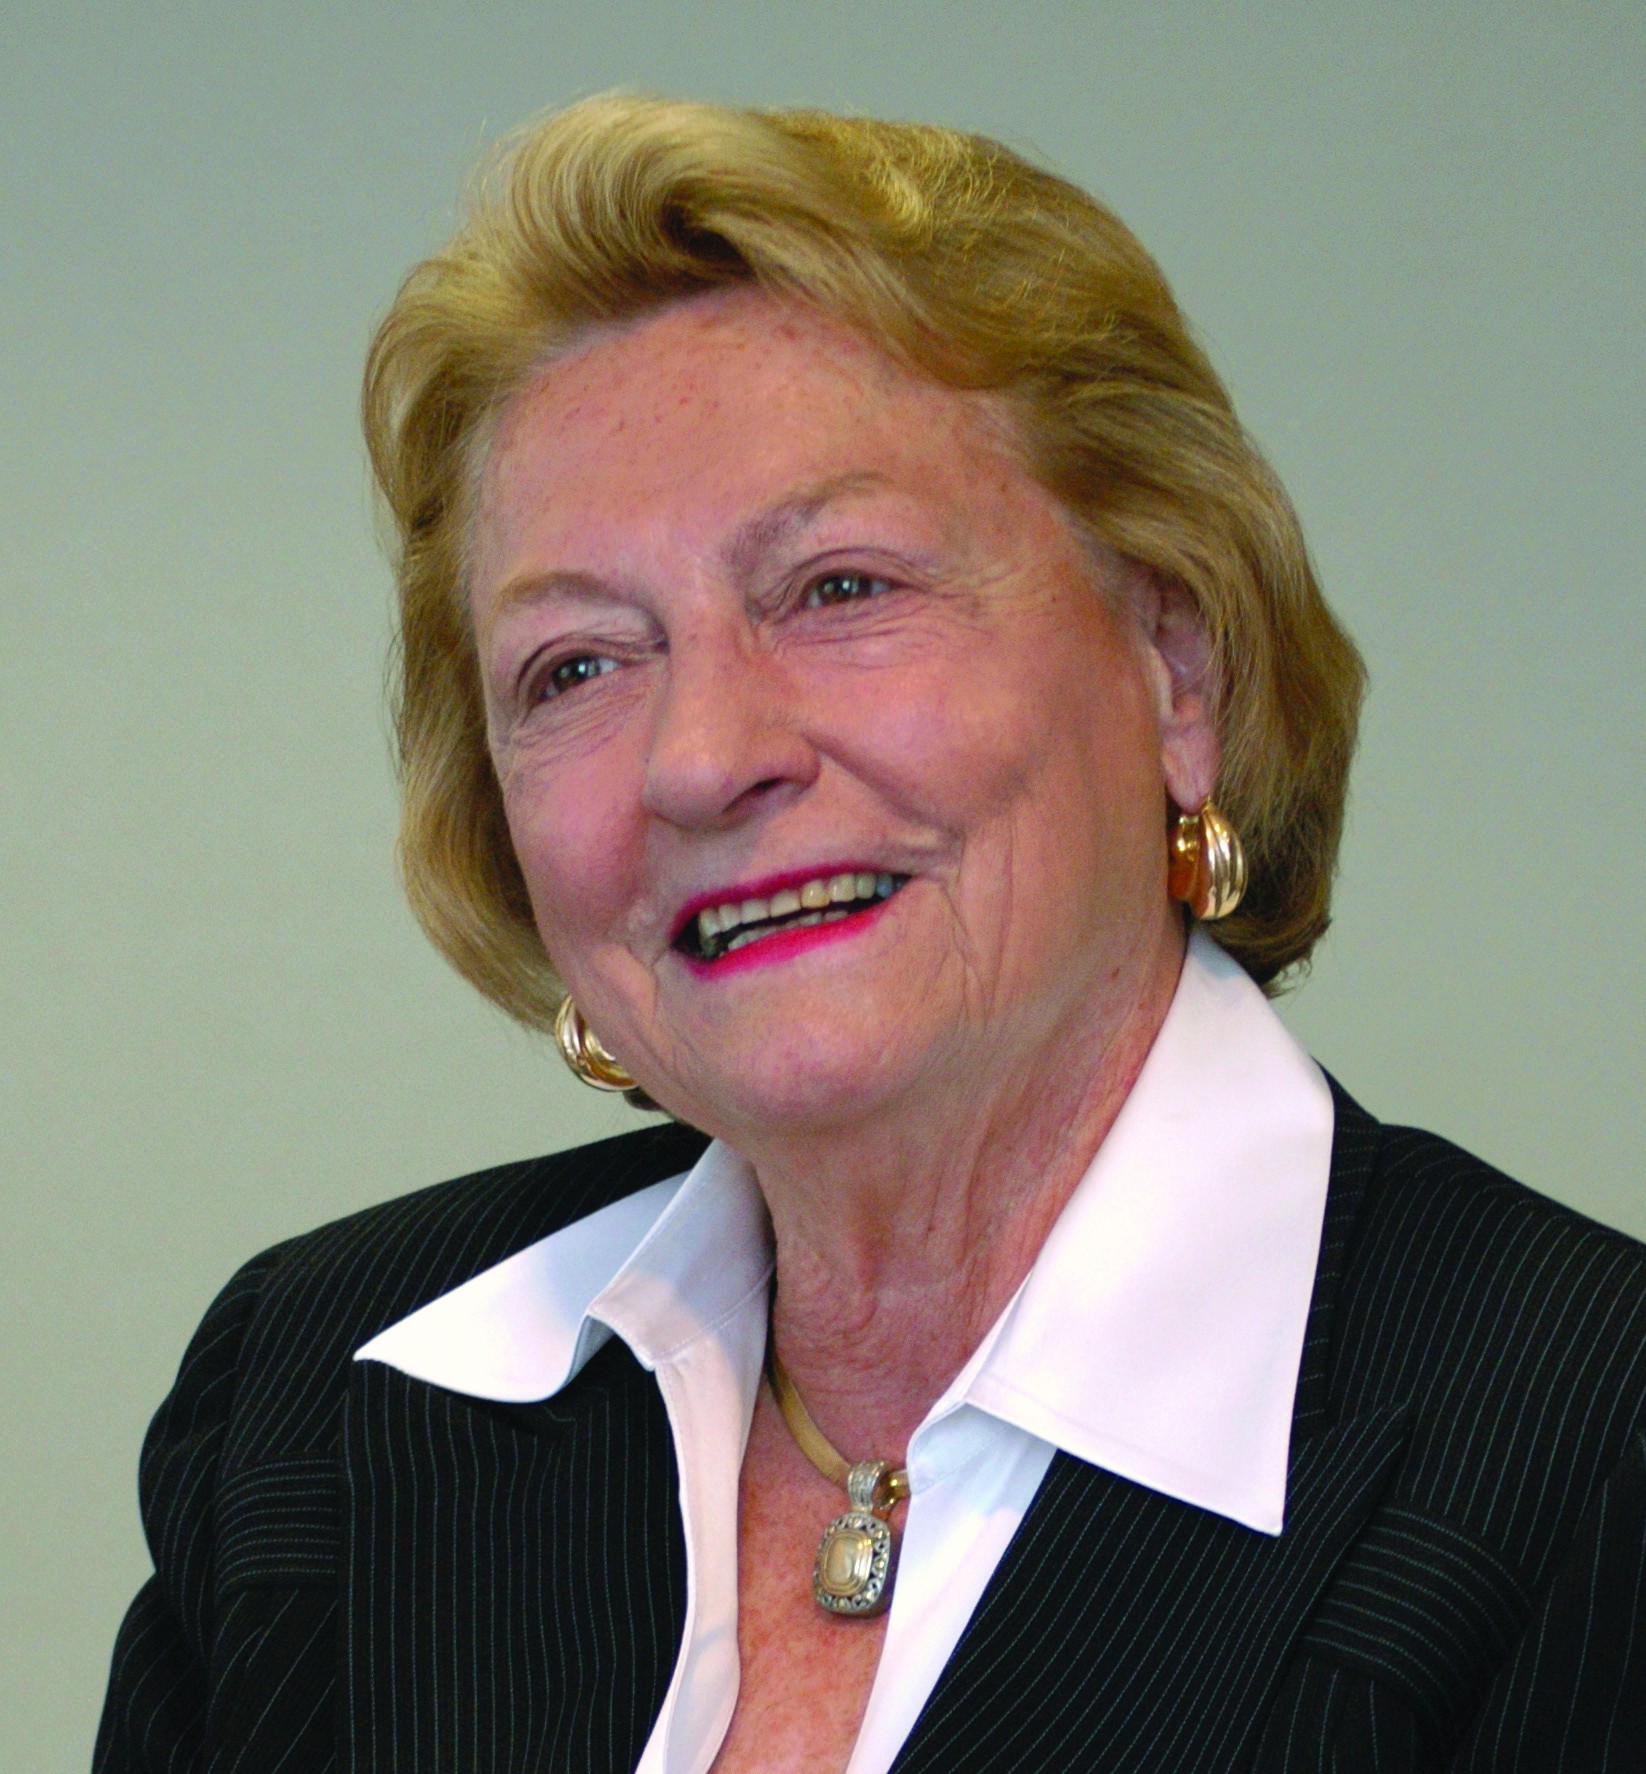 The Honorable Barbara Bailey Kennelly ’58 Encourages Dean’s List Students to Engage in Democracy